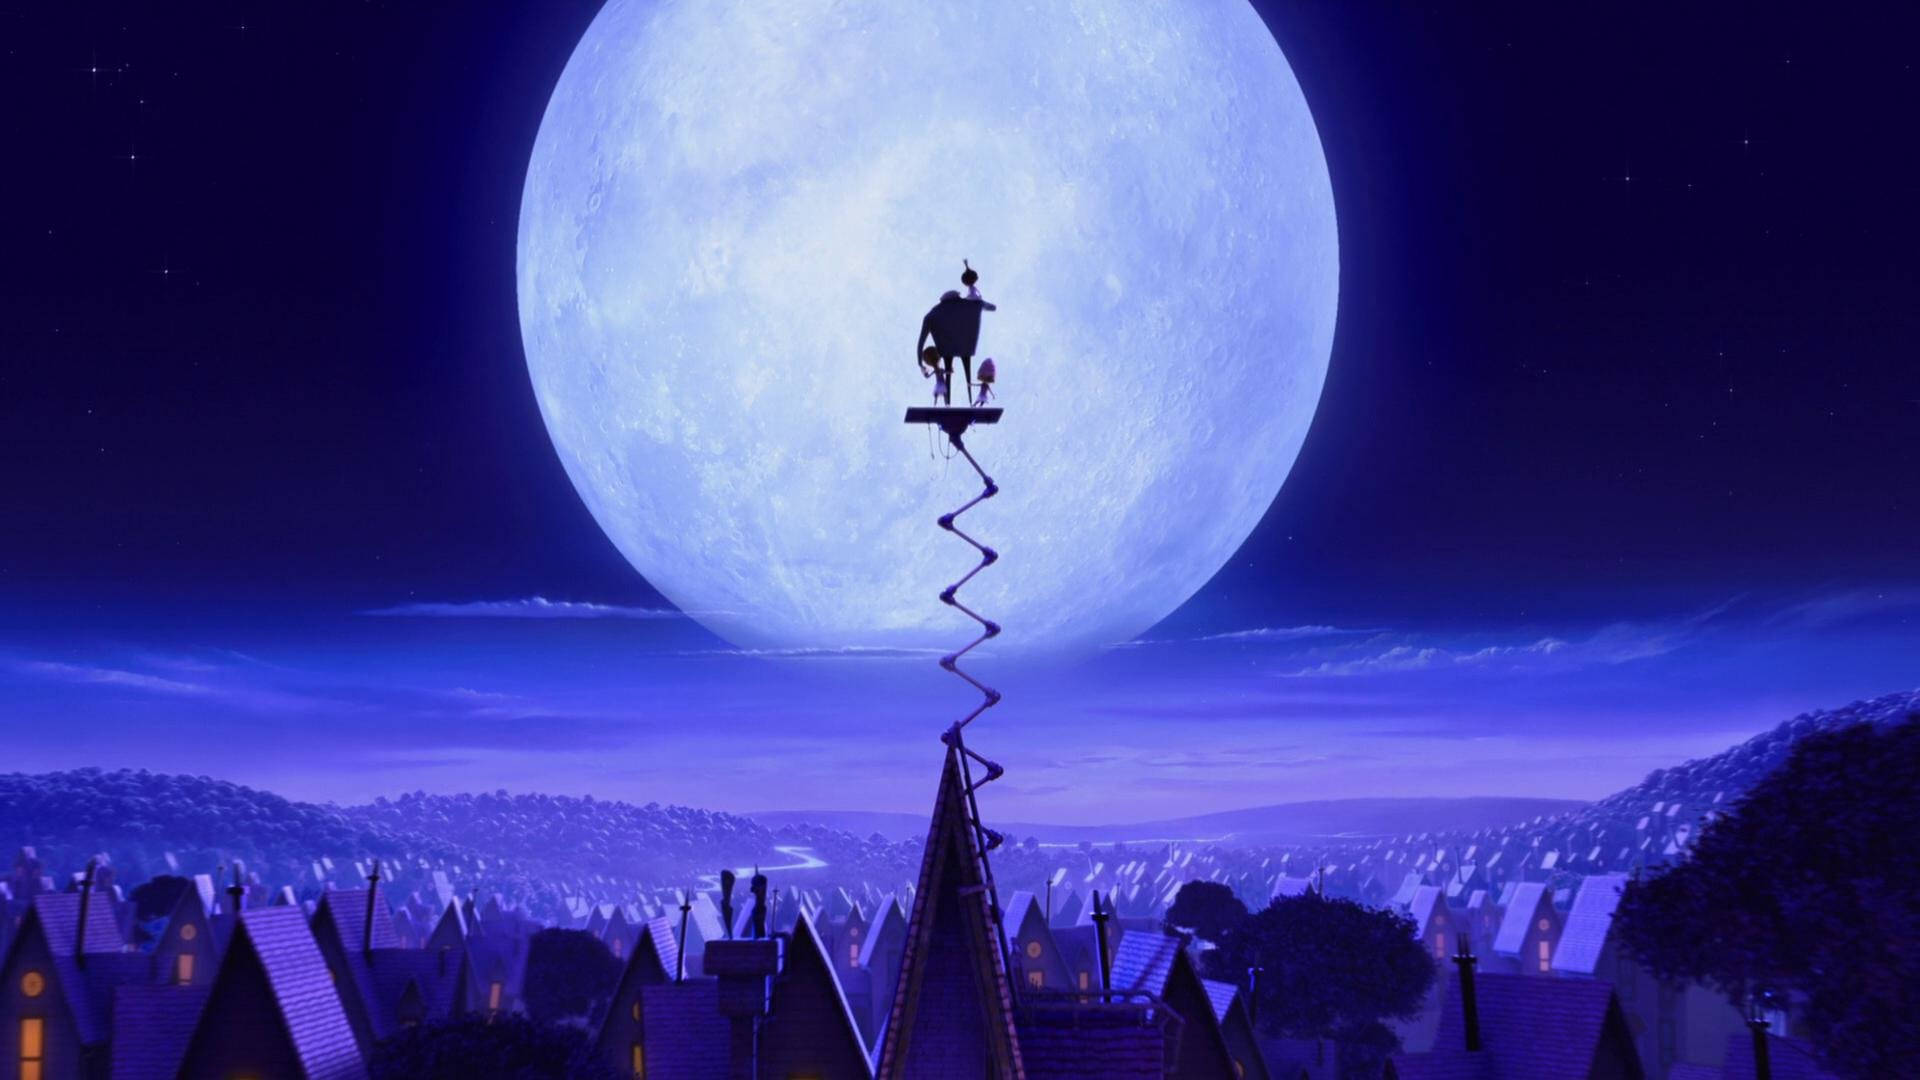 Despicable Me Iconic Moon Scene Background